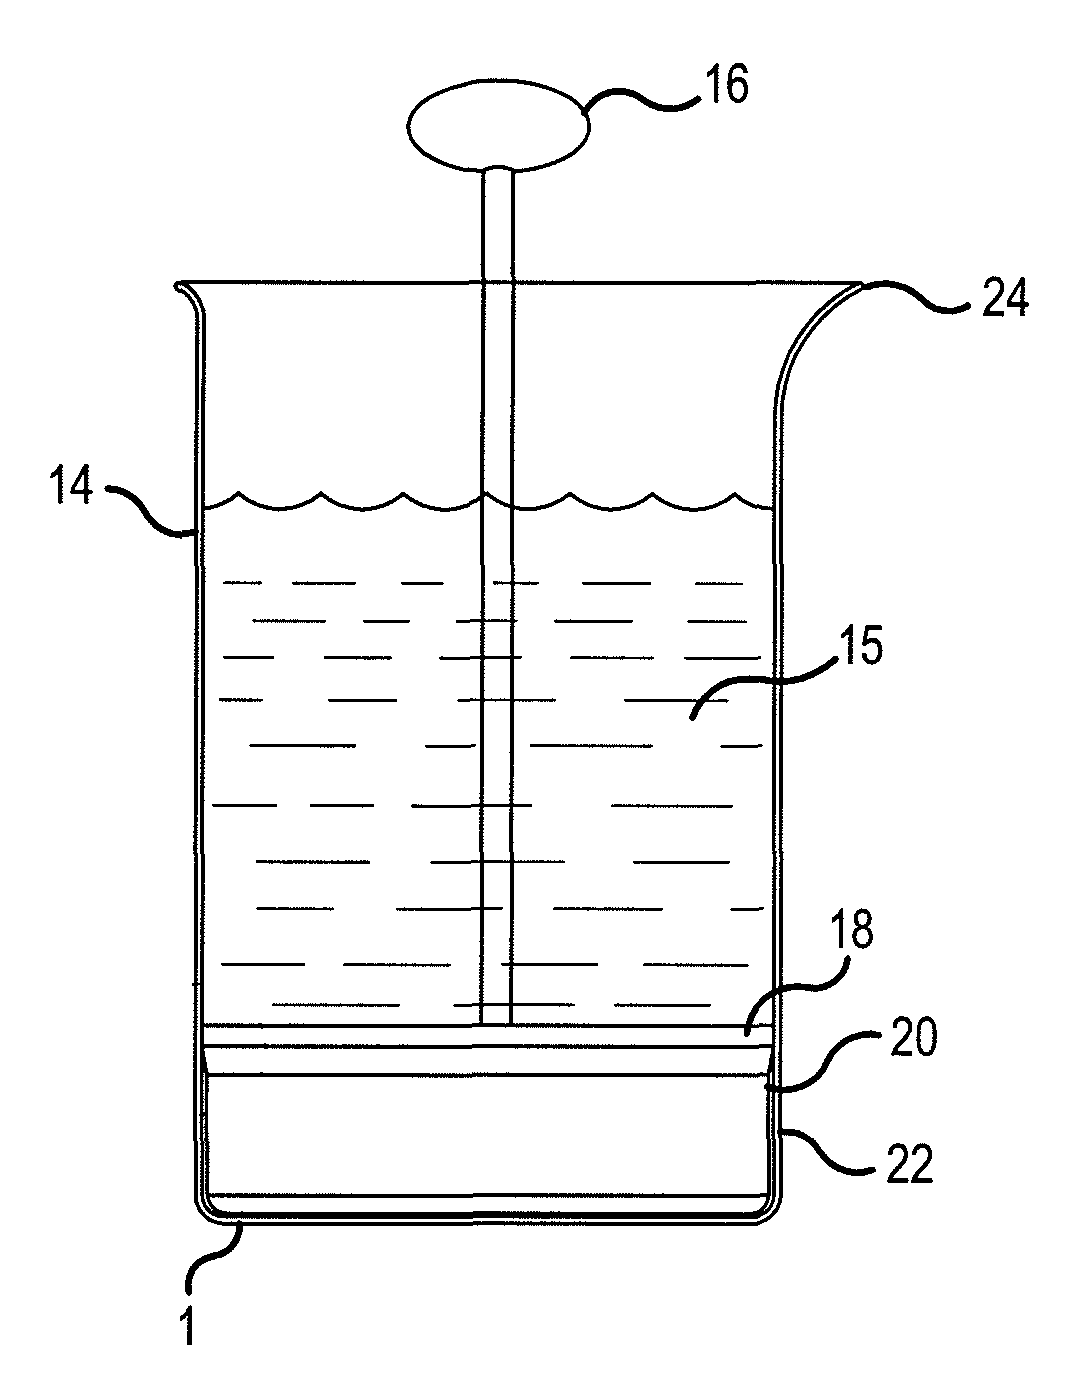 Device for removing spent flavor base from a beverage brewing apparatus